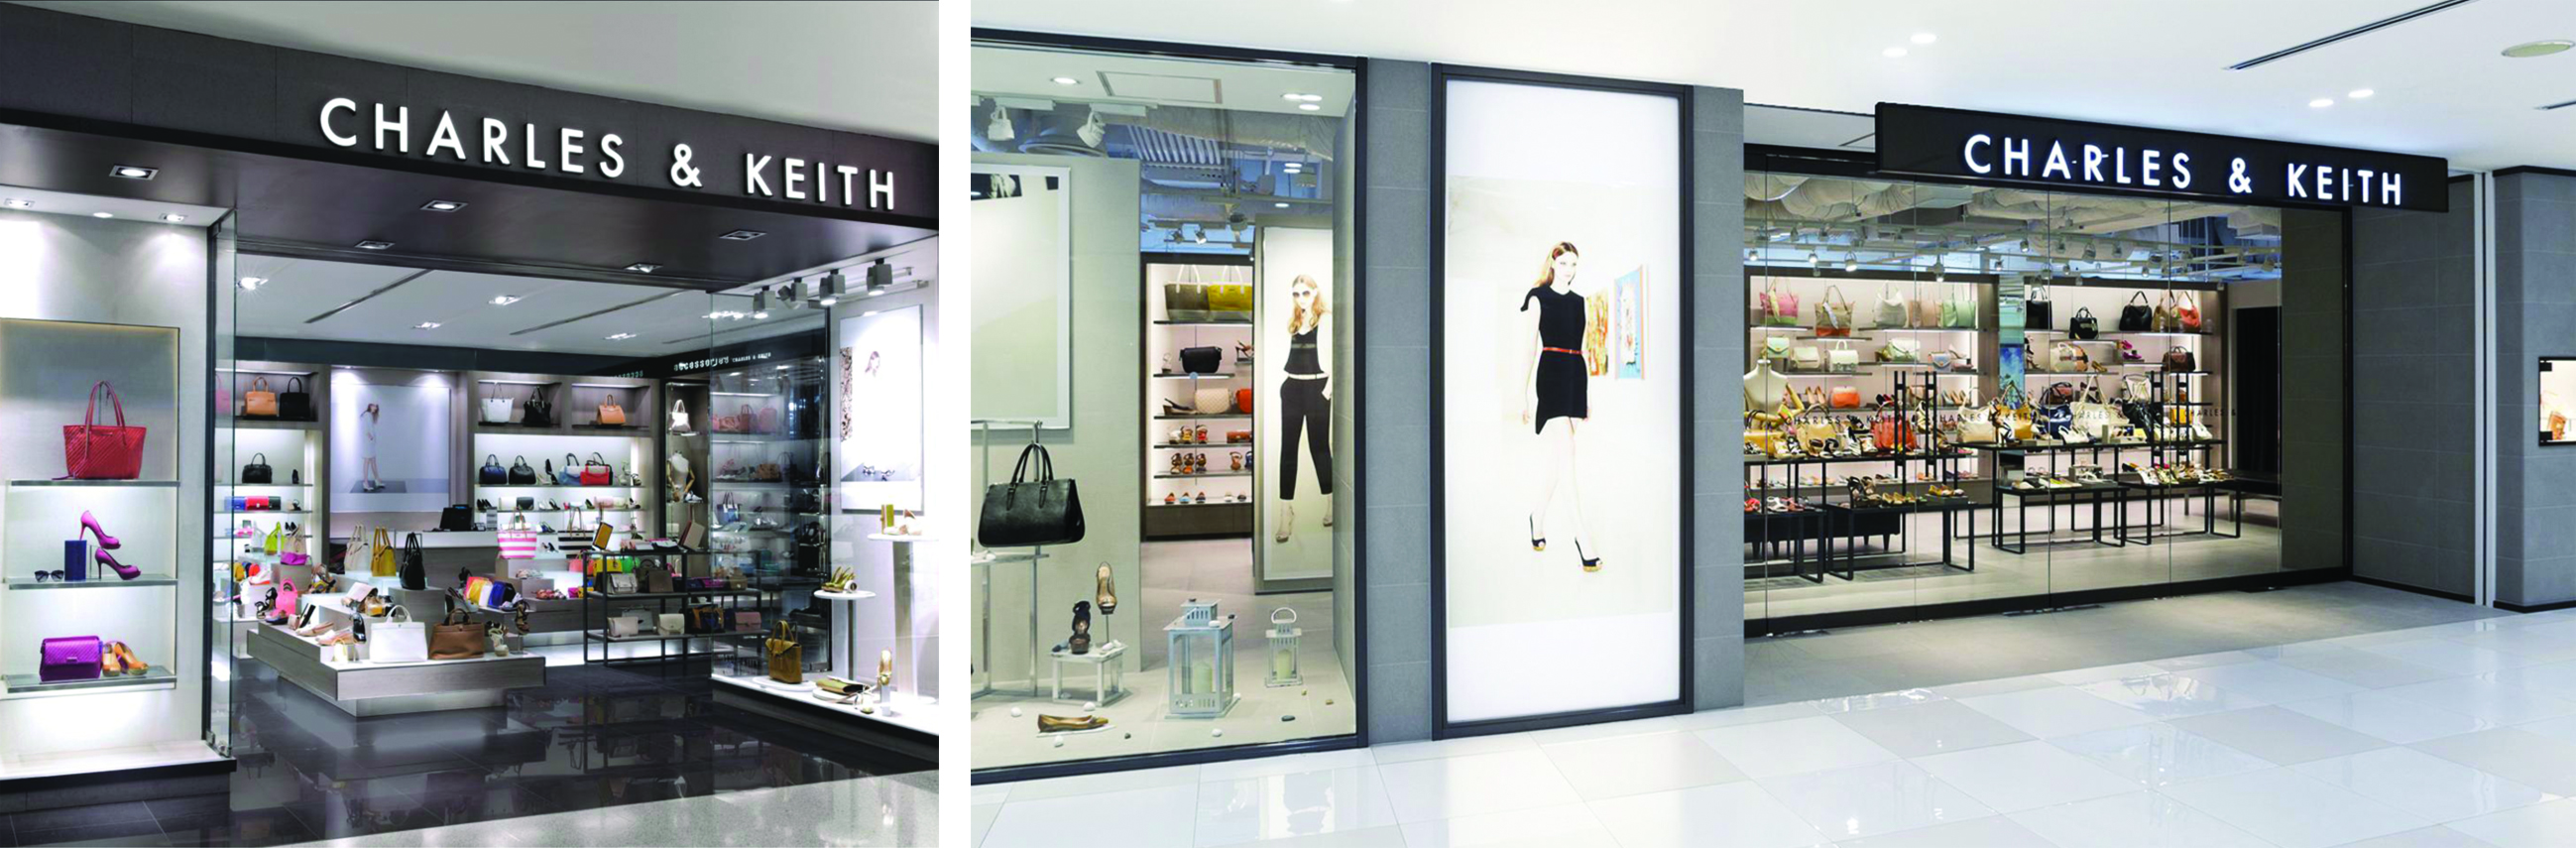 Successful fashion brand CHARLES & KEITH builds and grows with the support  of Eurostop solutions - Eurostop